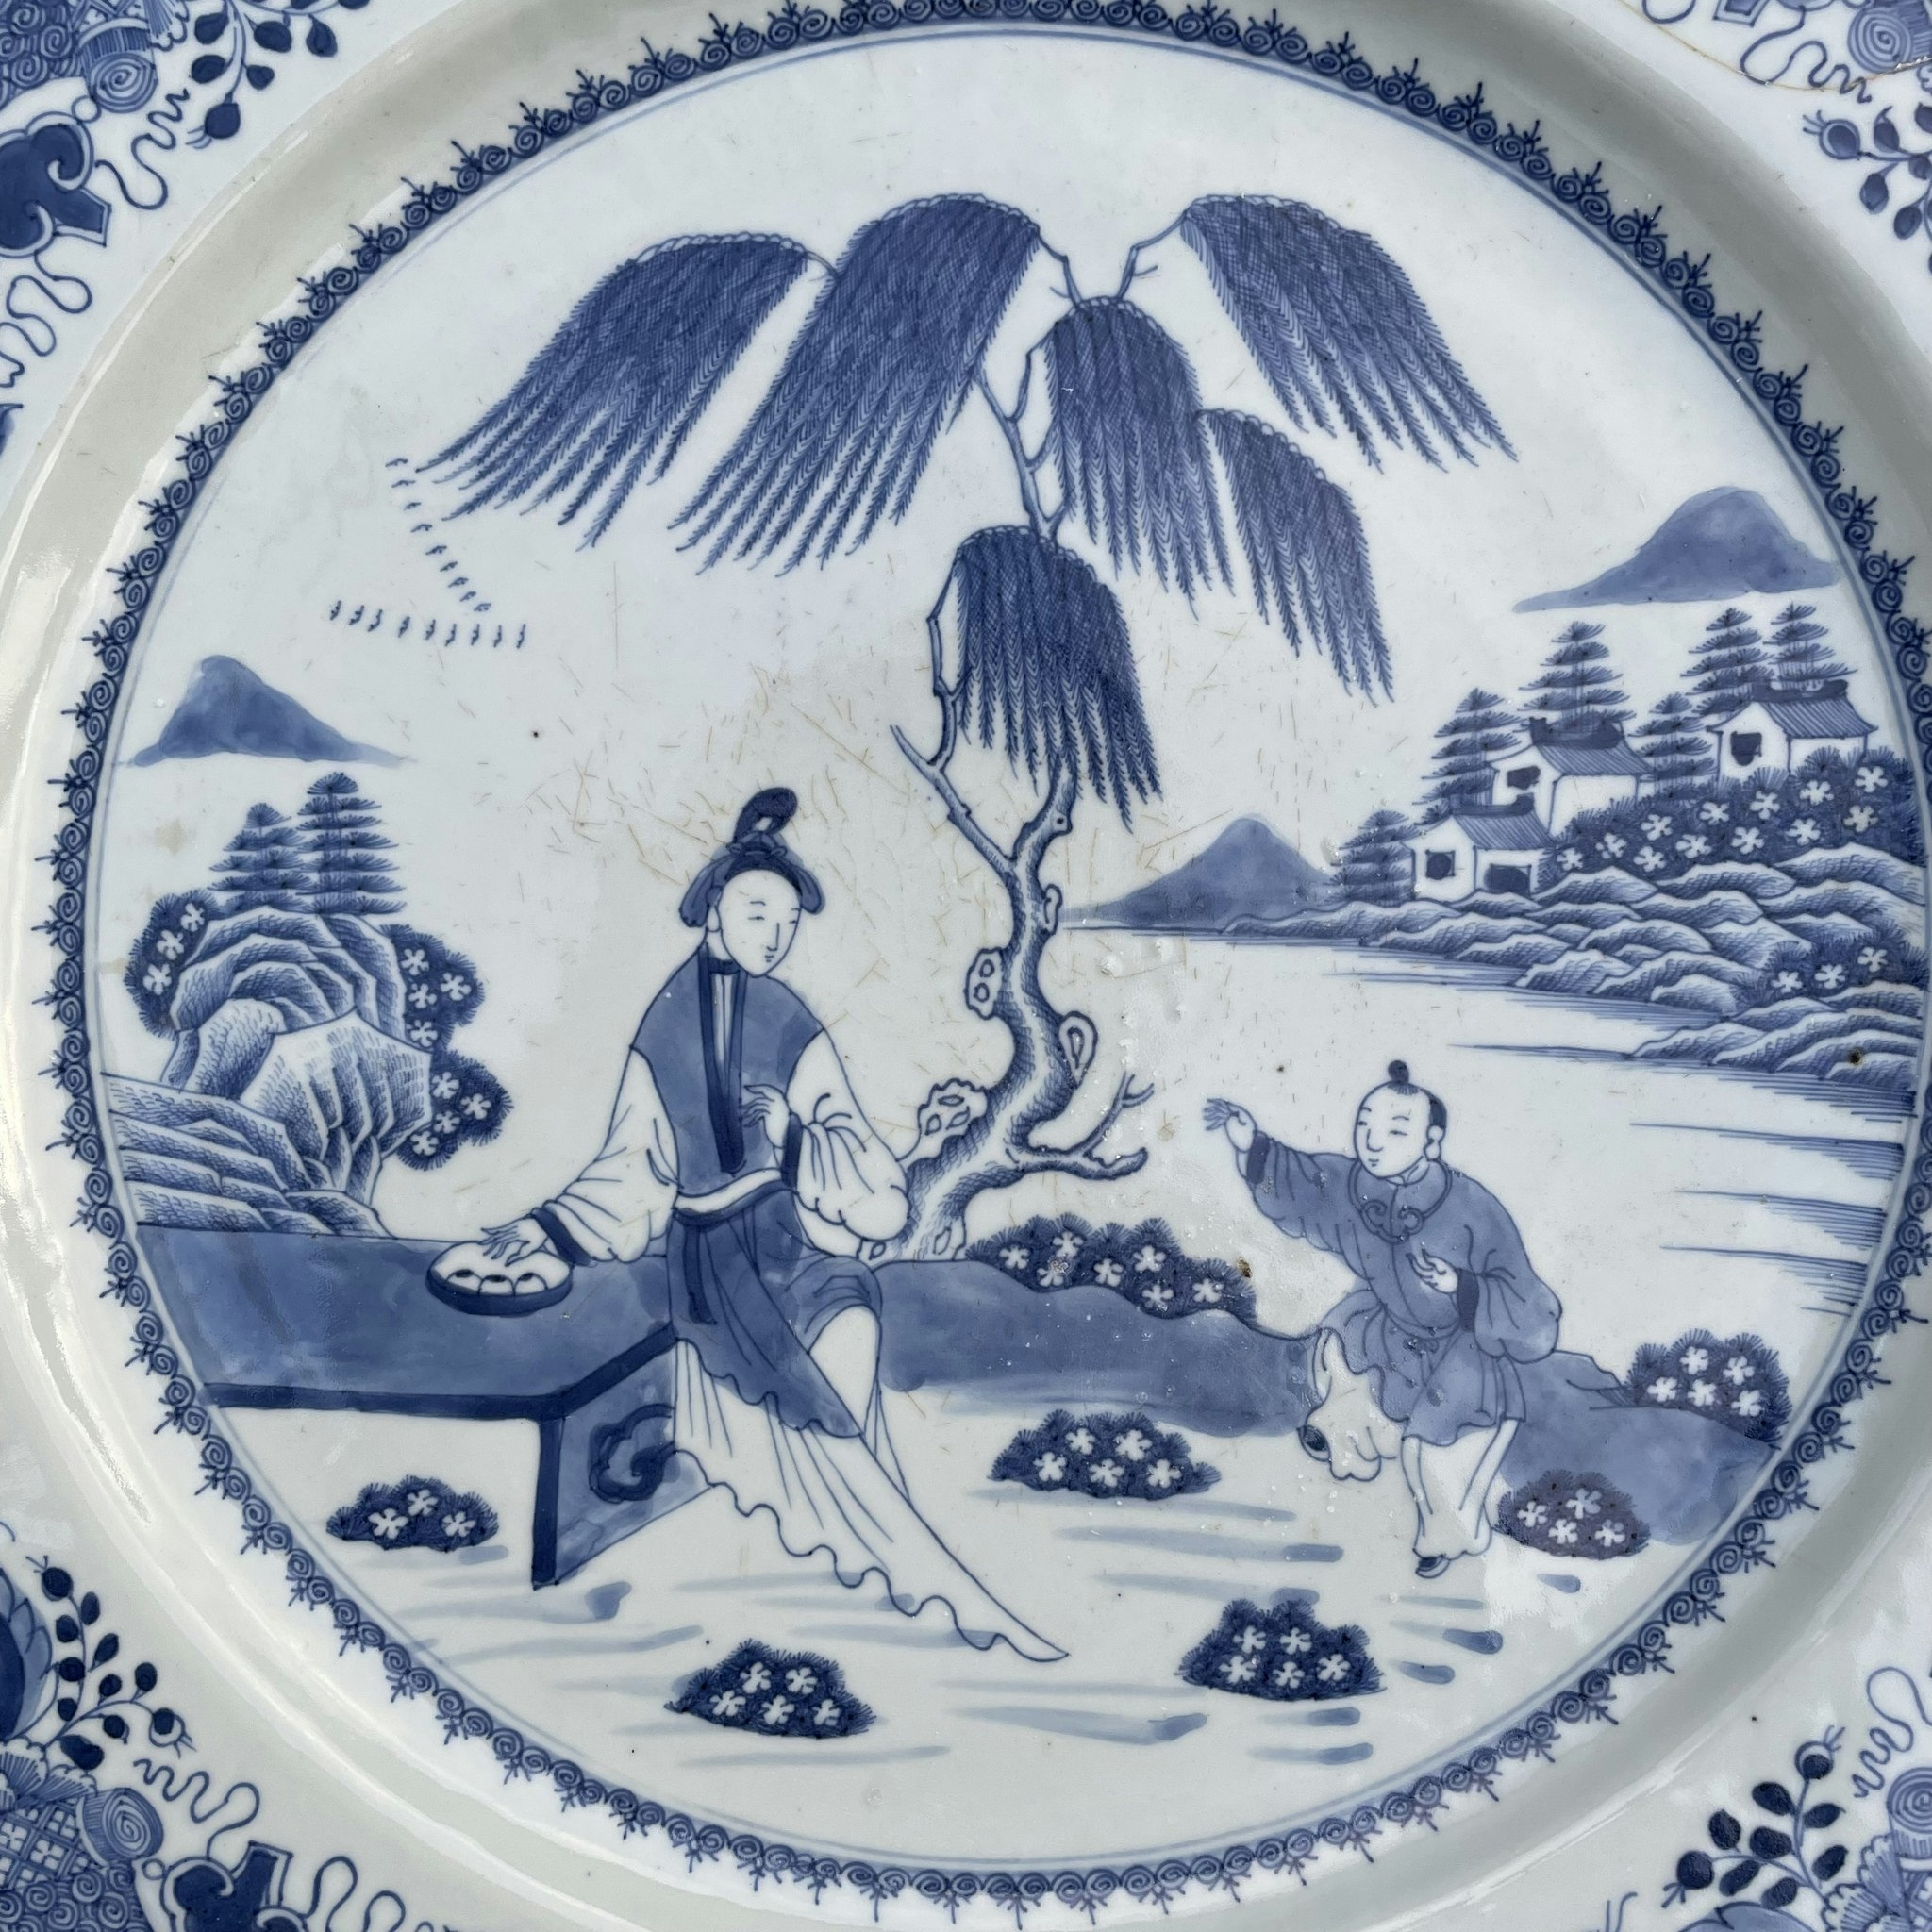 Antique Chinese Export Blue and White Porcelain charger, Qianlong period #766